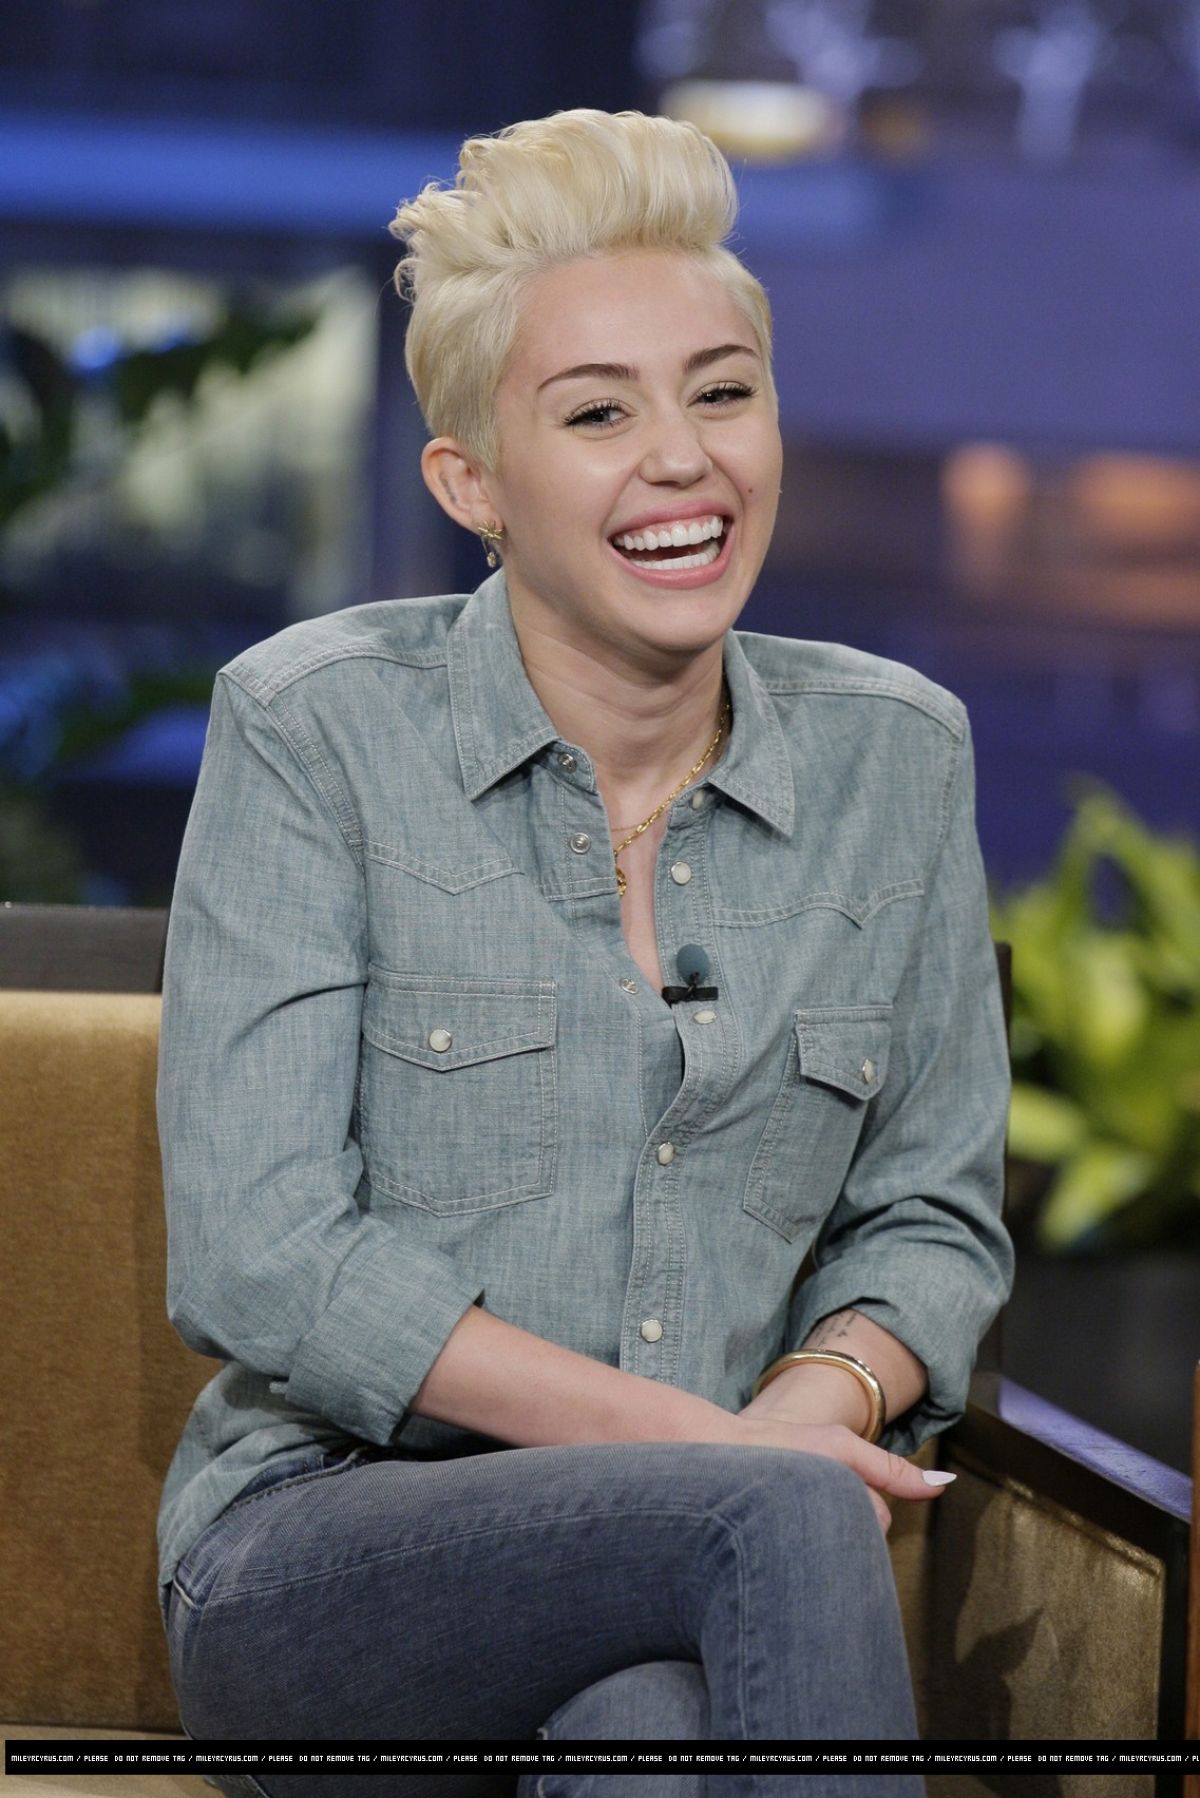 MILEY CYRUS at The Tonight Show with Jay Leno – HawtCelebs